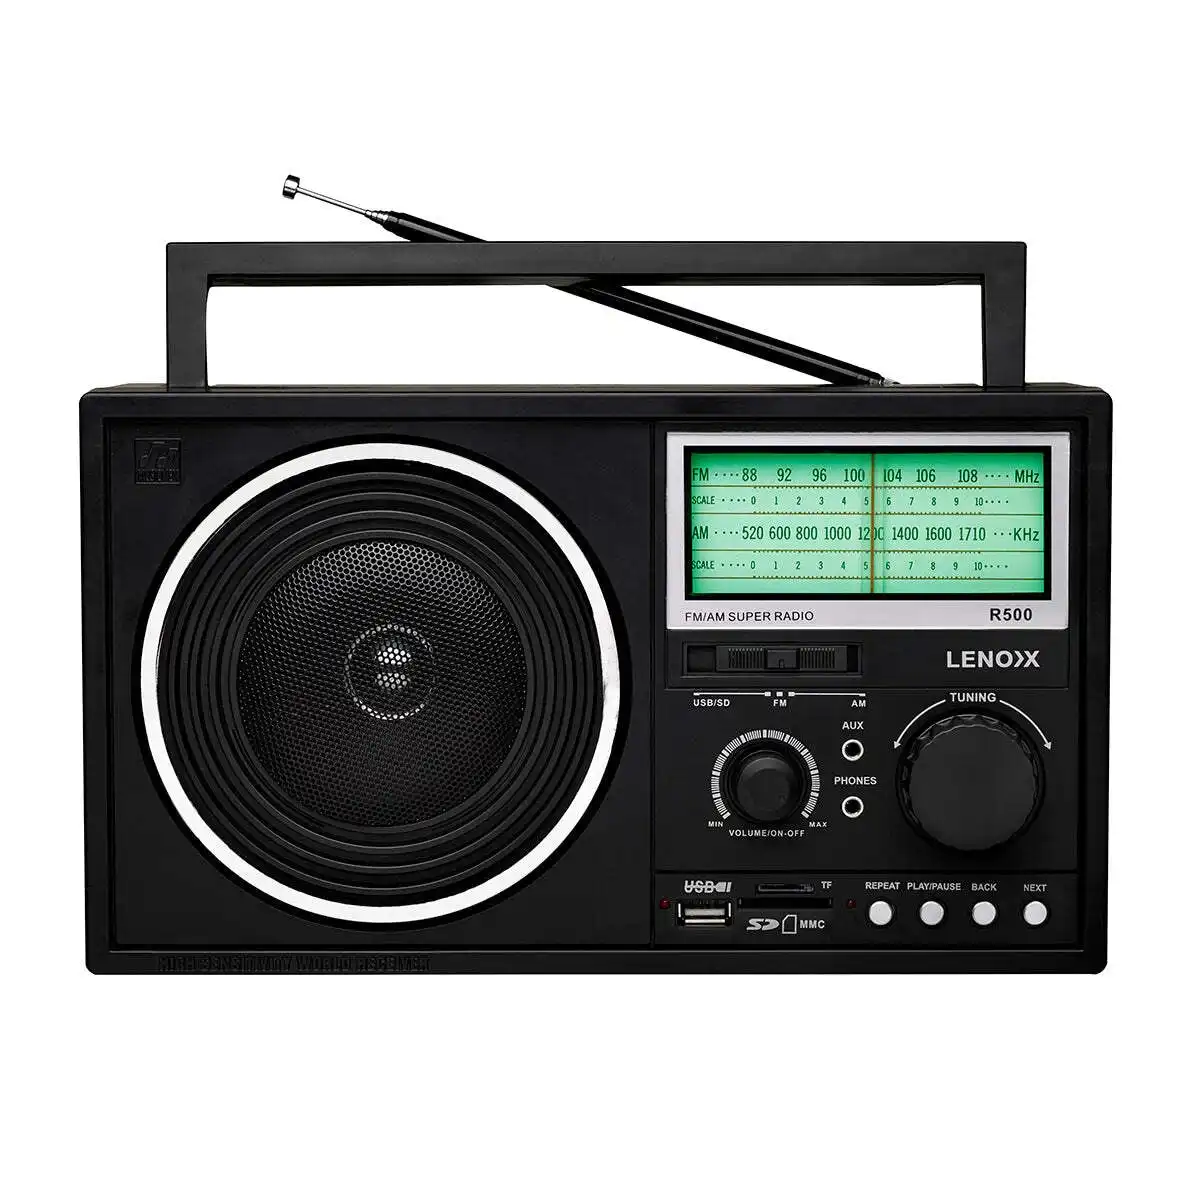 Super Radio with Antenna (Black) Battery Operated w/ Bandwidth 540-1710